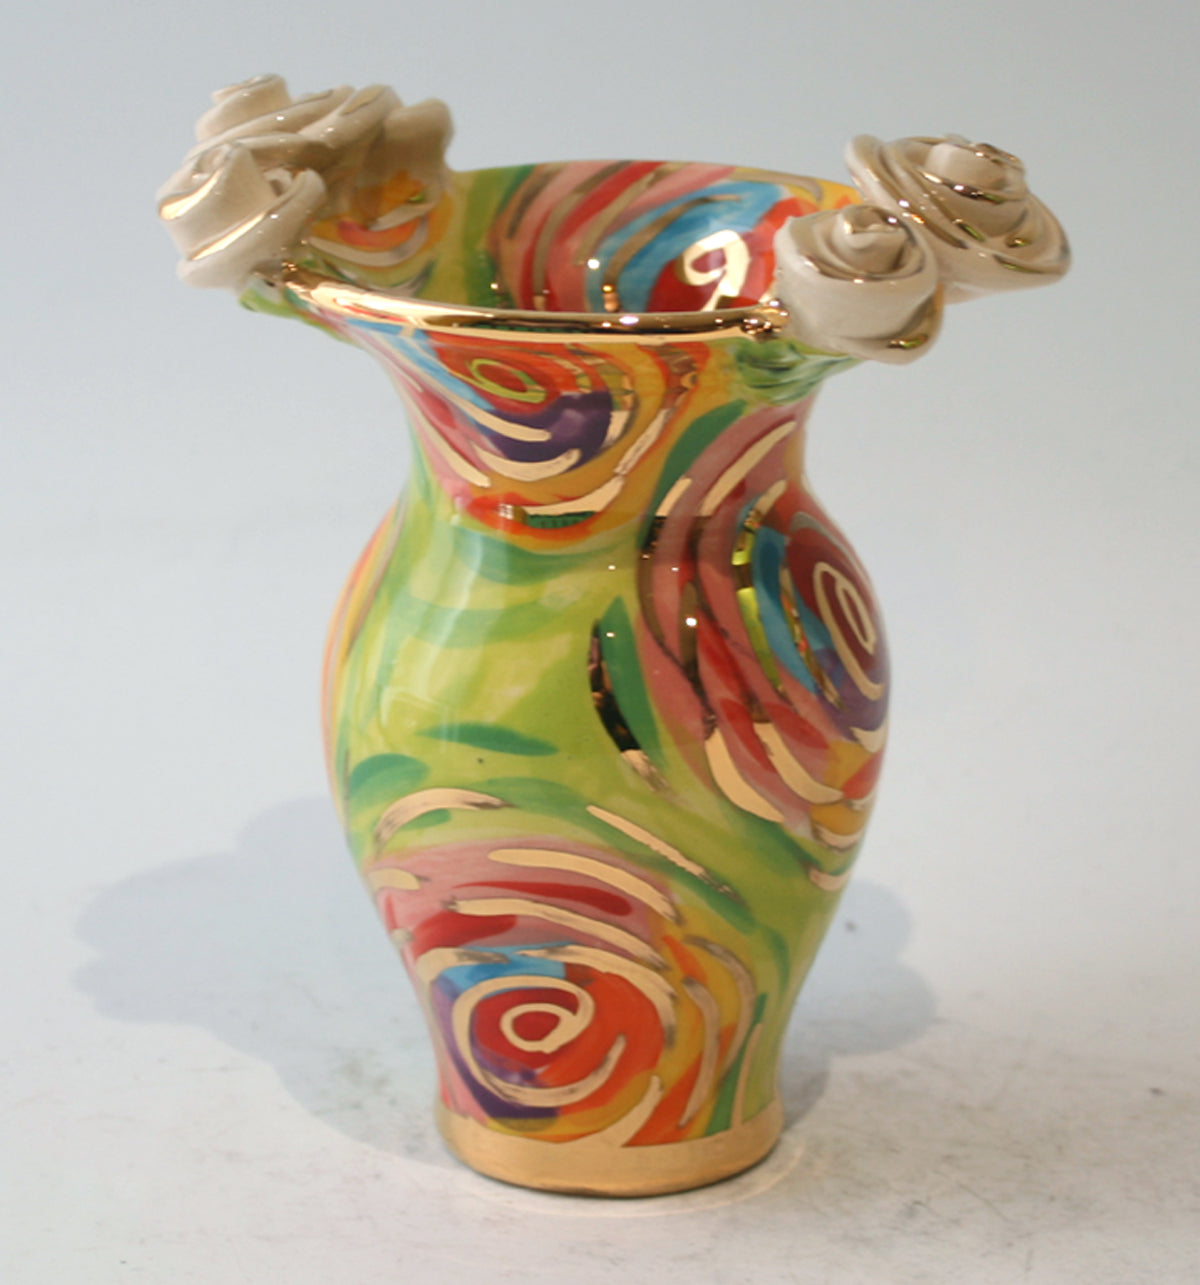 Tiny Rose Edged Vase in Green Swirls - MaryRoseYoung